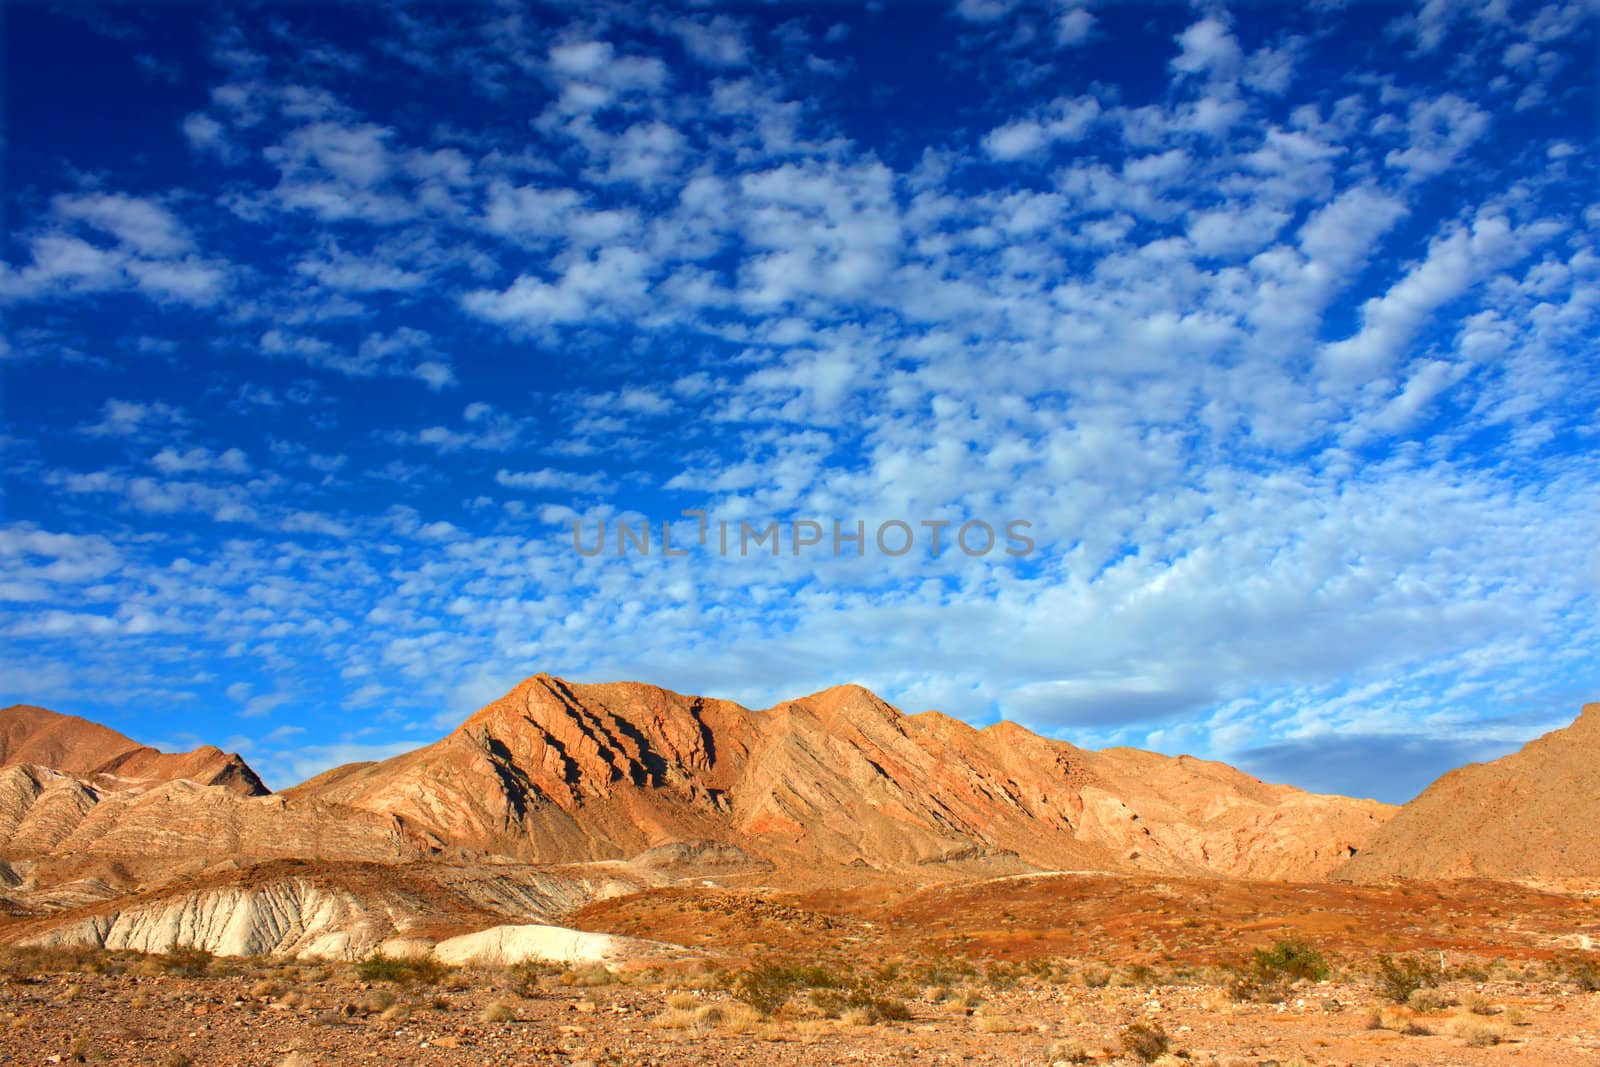 Clouds form an intricate pattern over the desert landscape of Lake Mead National Recreation Area in Nevada.